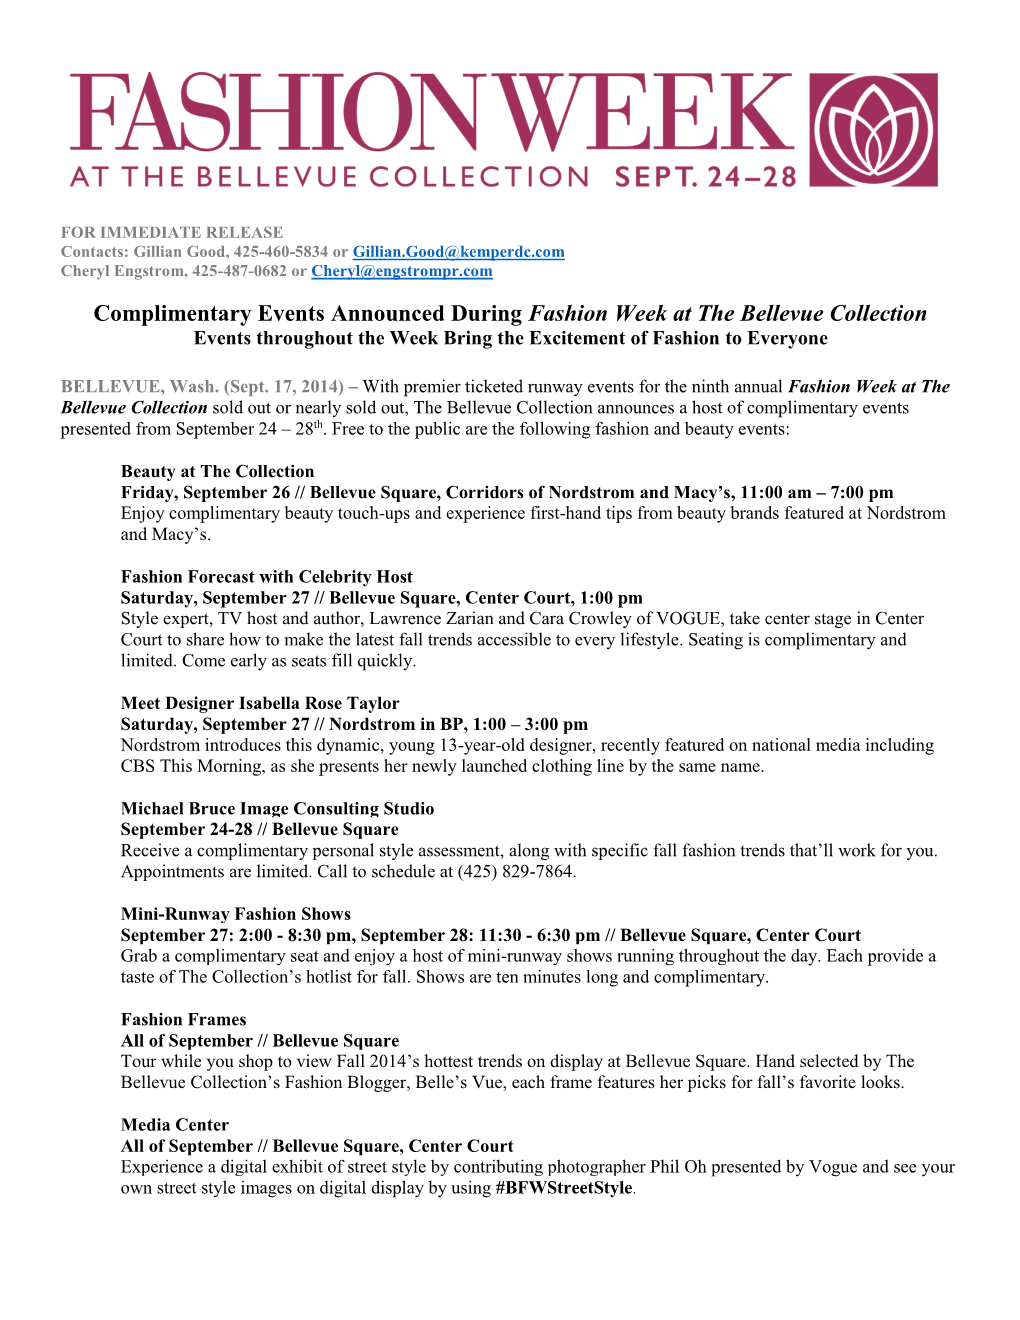 Complimentary Events Announced During Fashion Week at the Bellevue Collection Events Throughout the Week Bring the Excitement of Fashion to Everyone